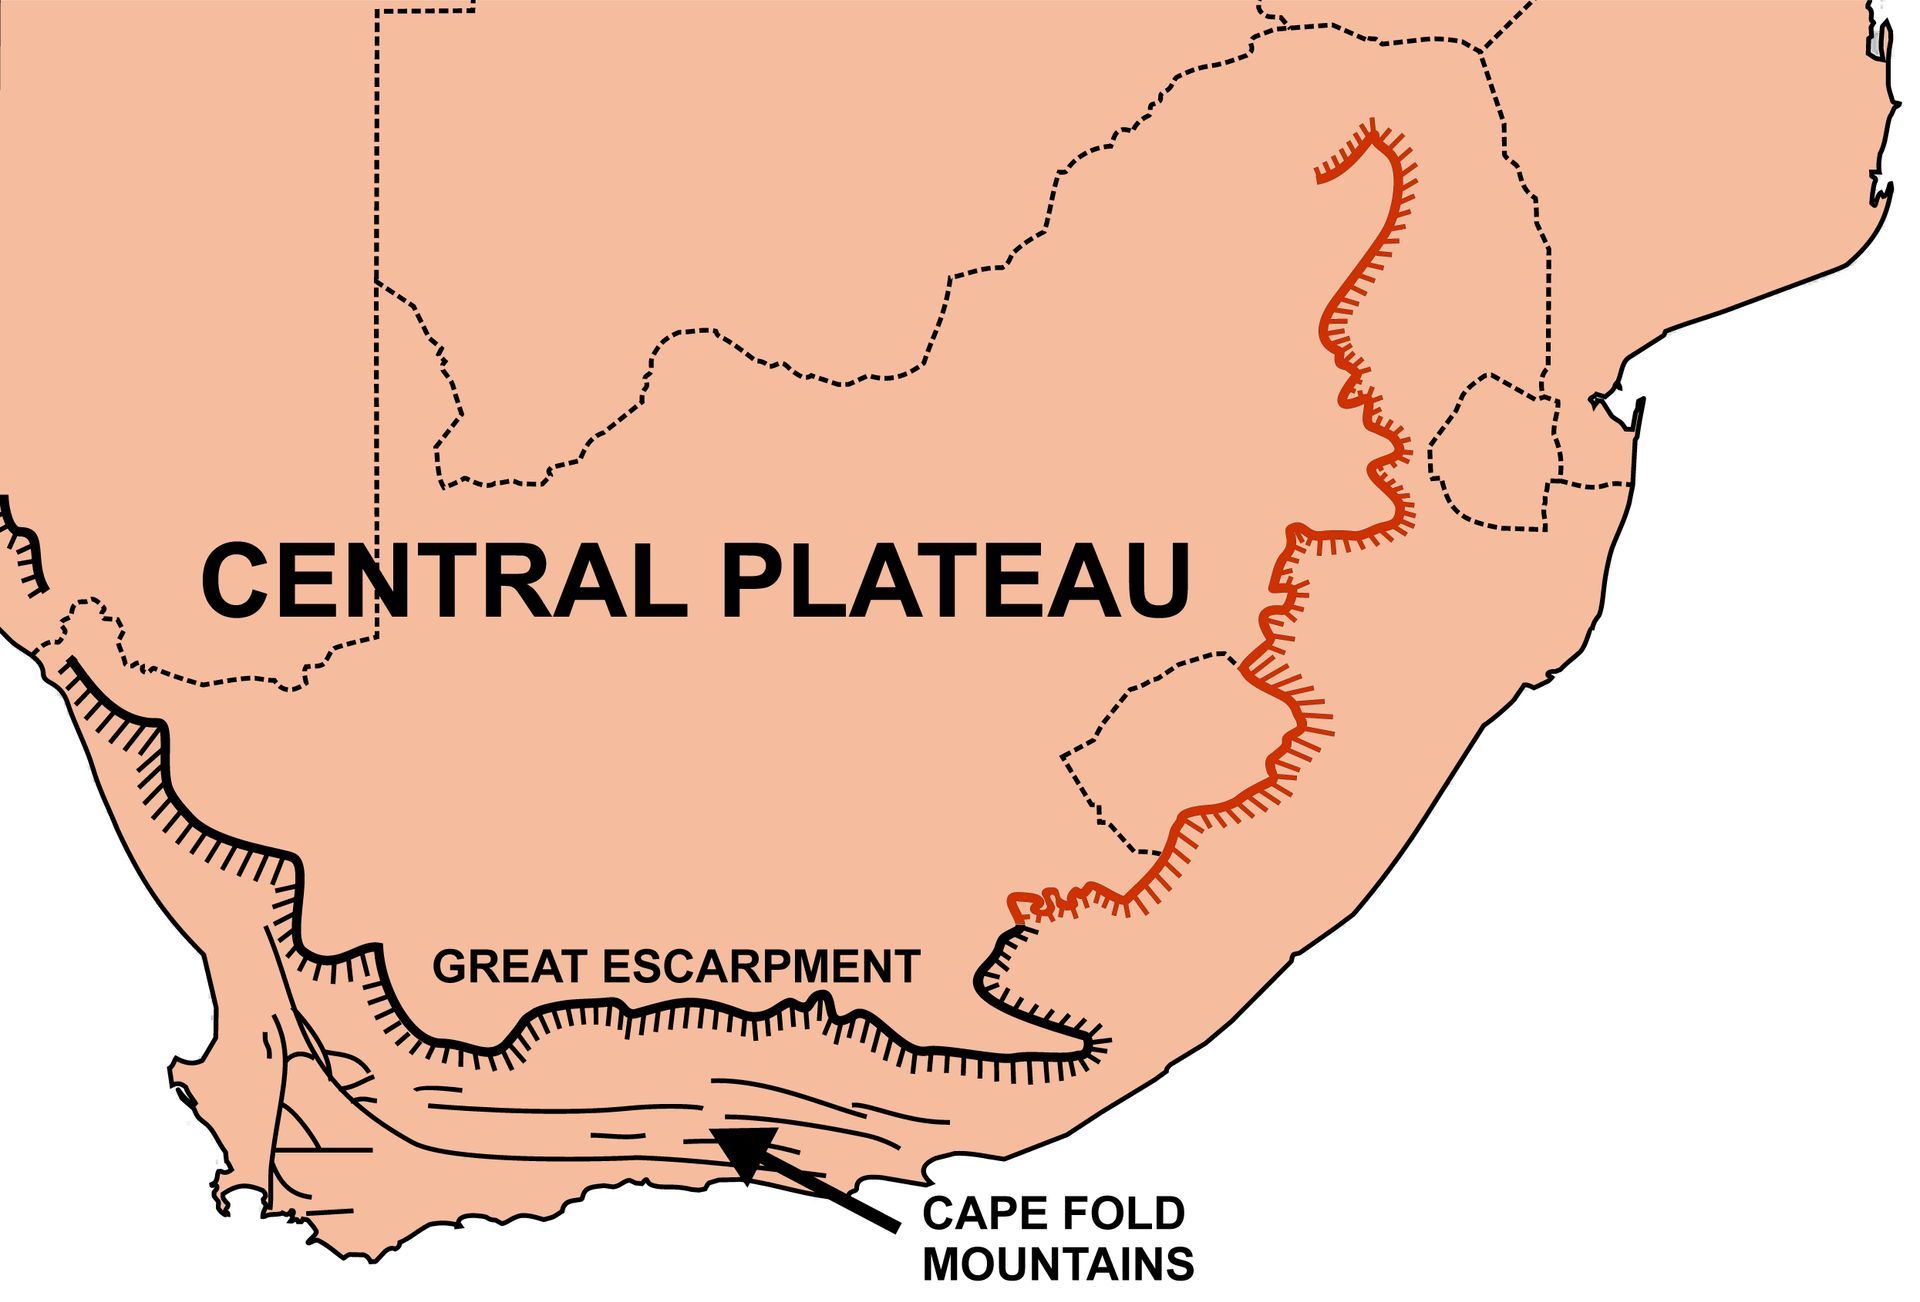 A map of south africa shows the central plateau